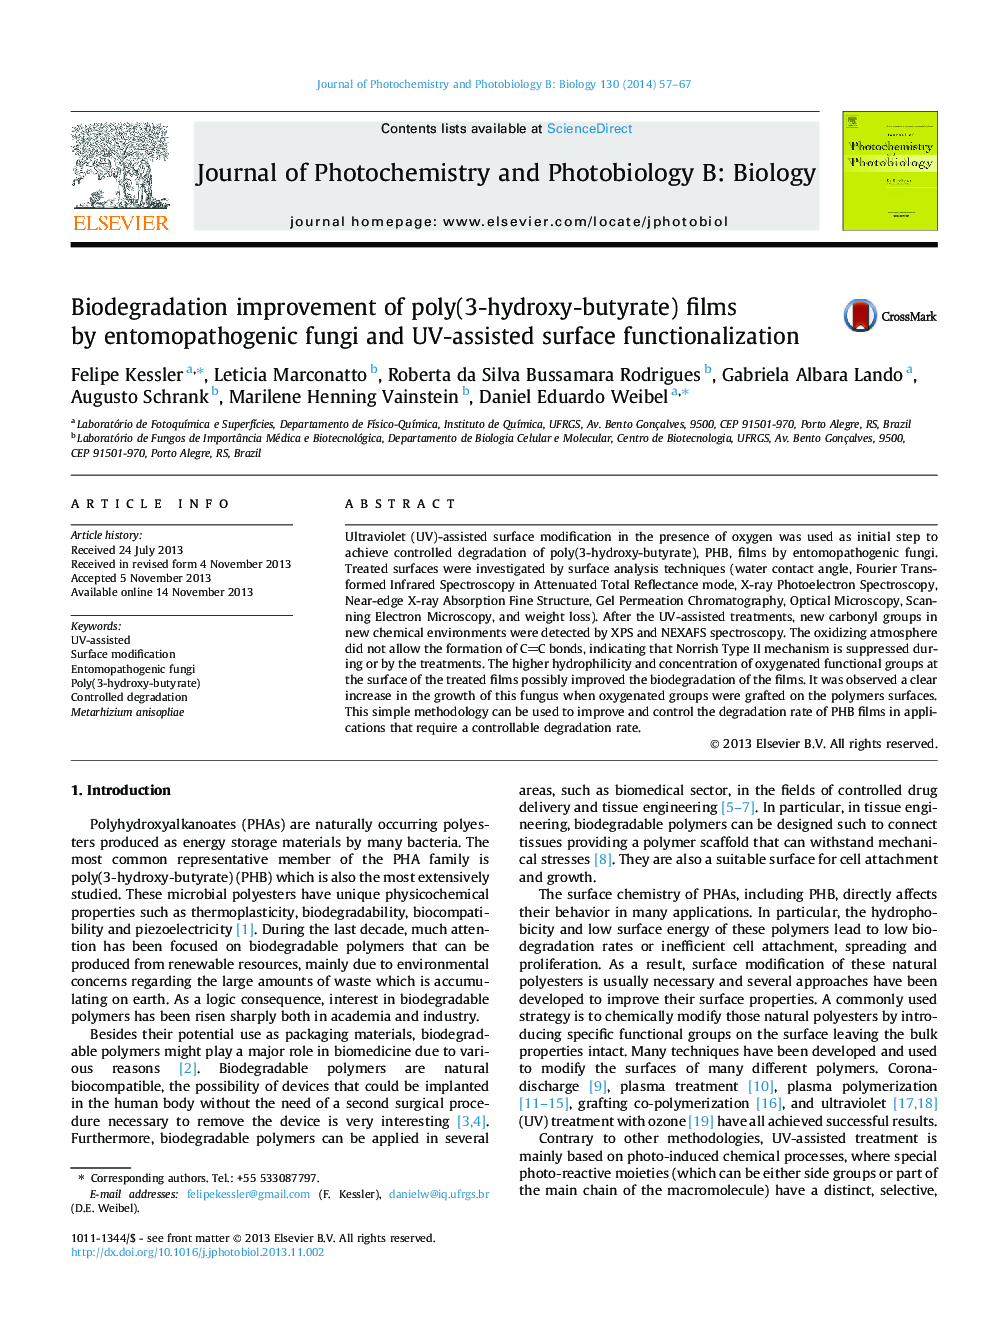 Biodegradation improvement of poly(3-hydroxy-butyrate) films by entomopathogenic fungi and UV-assisted surface functionalization